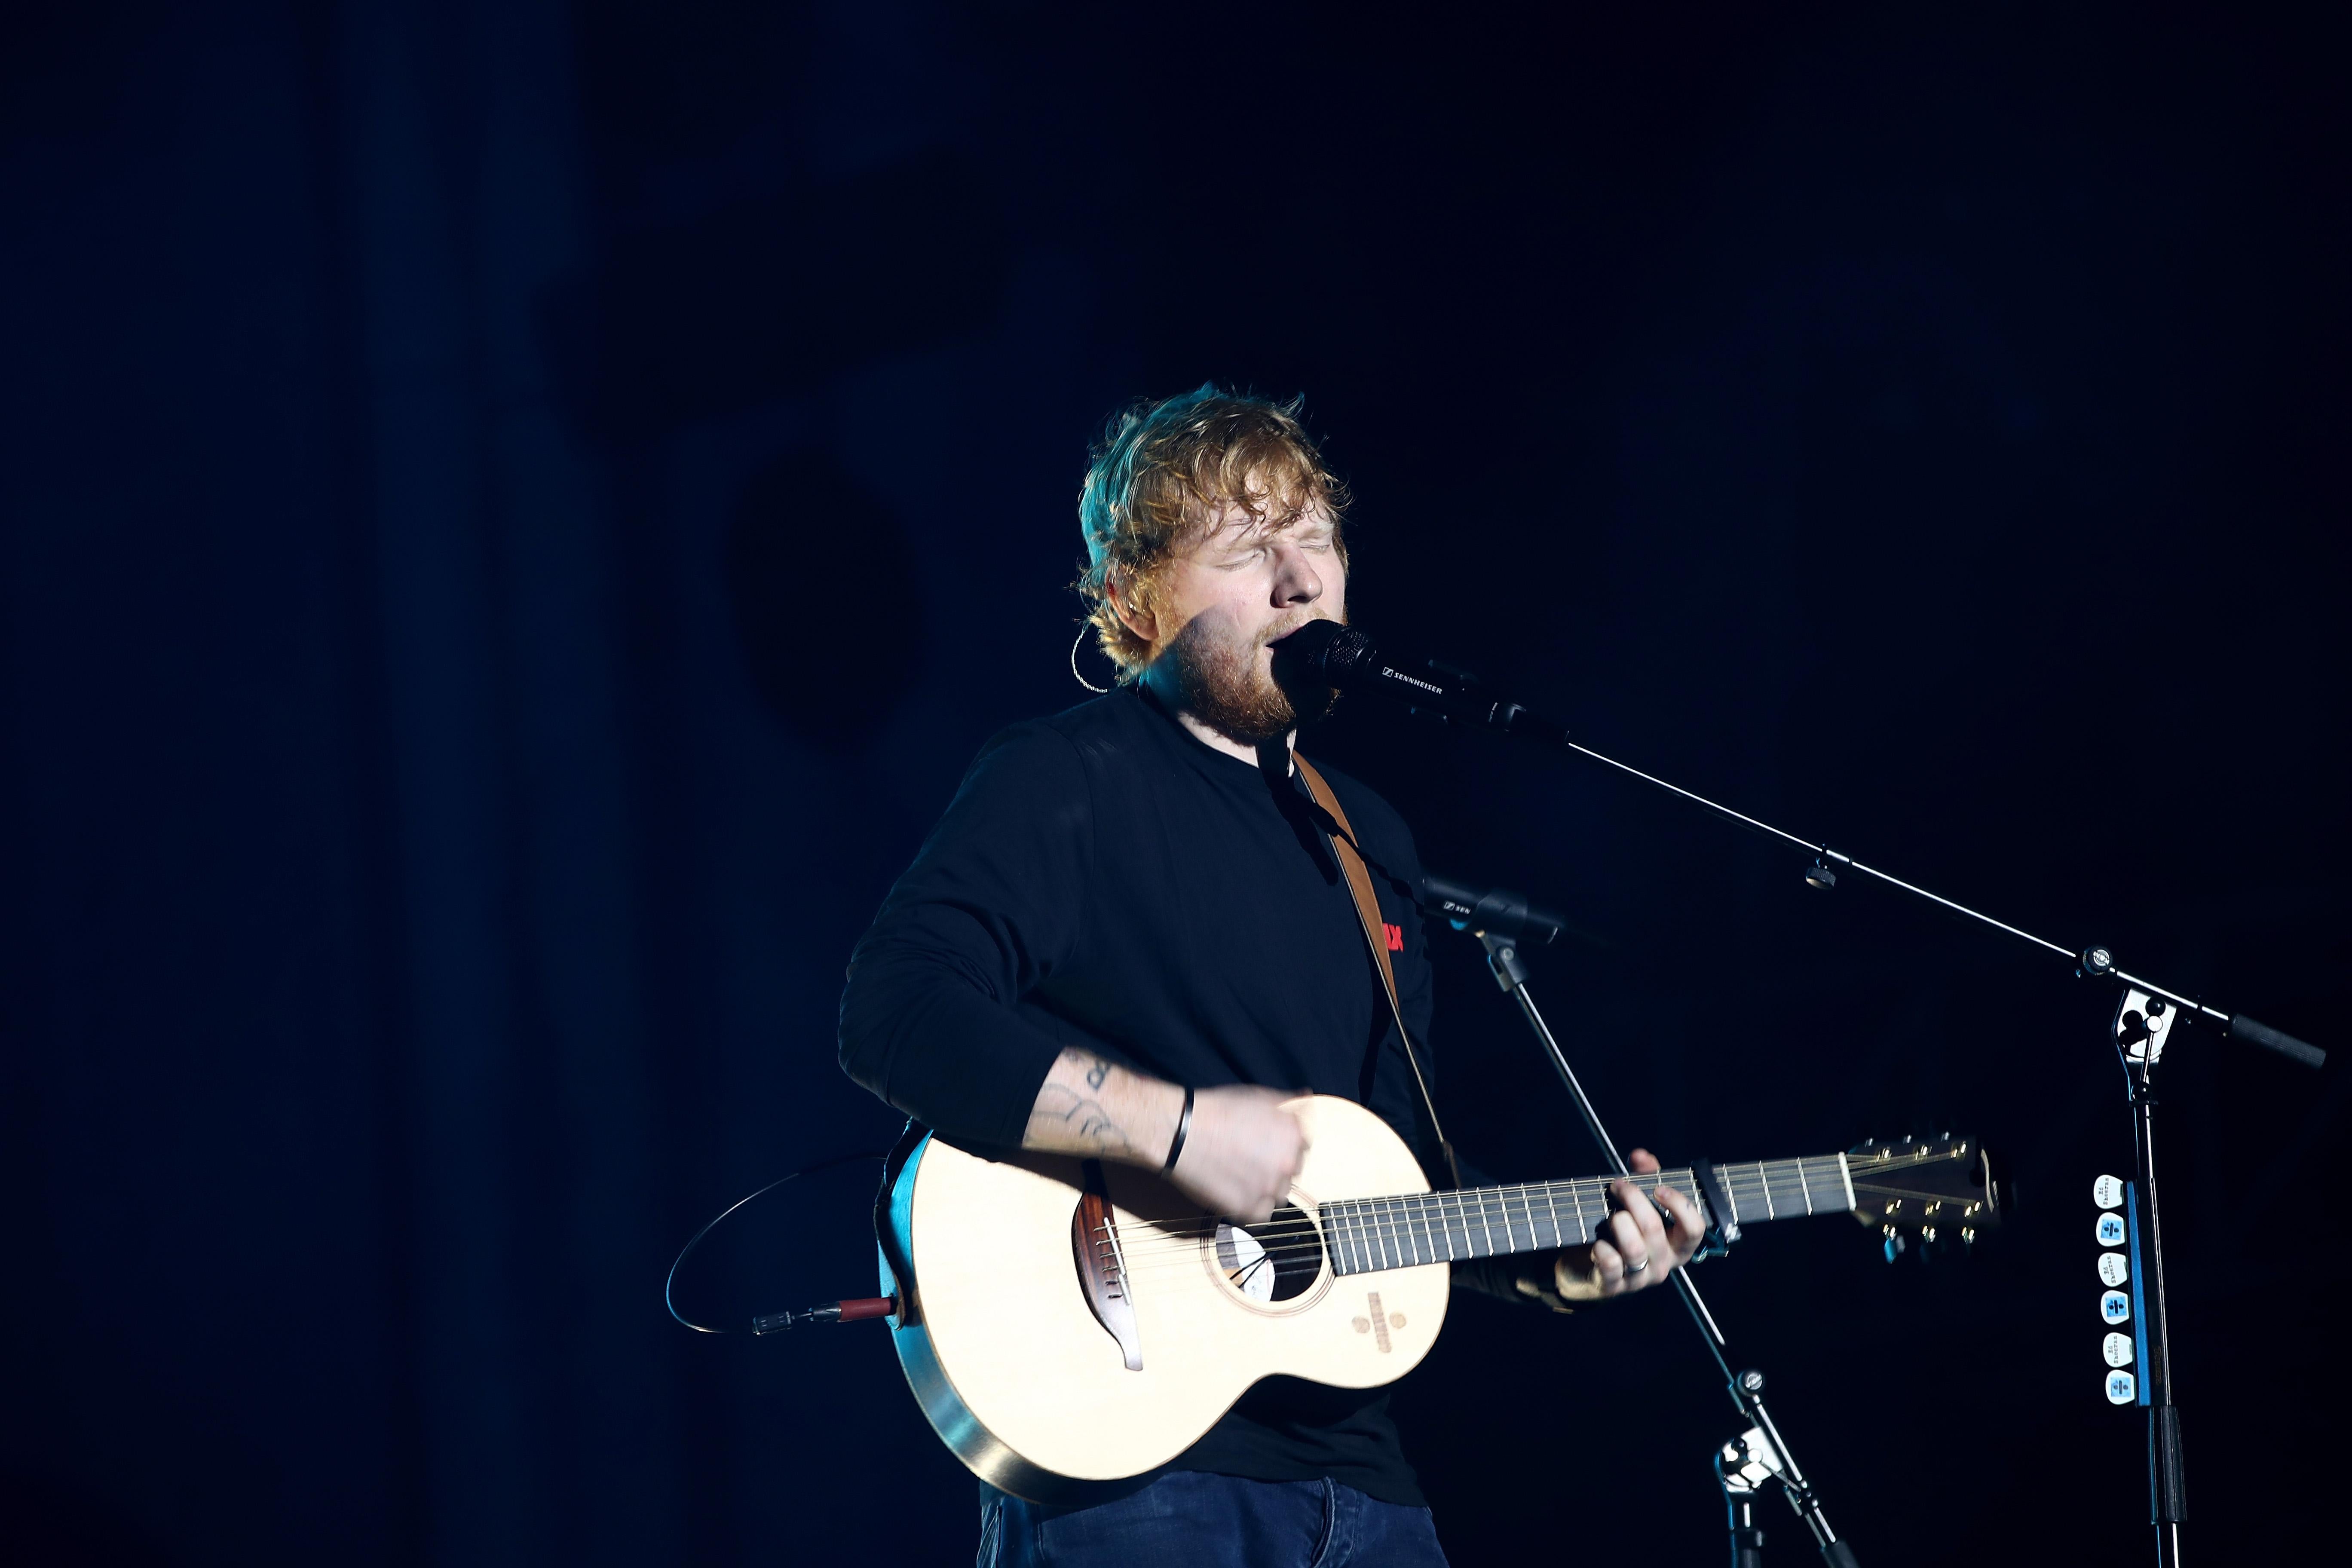 AUCKLAND, NEW ZEALAND - MARCH 24:  Ed Sheeran performs on stage at Mt Smart Stadium on March 24, 2018 in Auckland, New Zealand.  (Photo by Phil Walter/Getty Images)